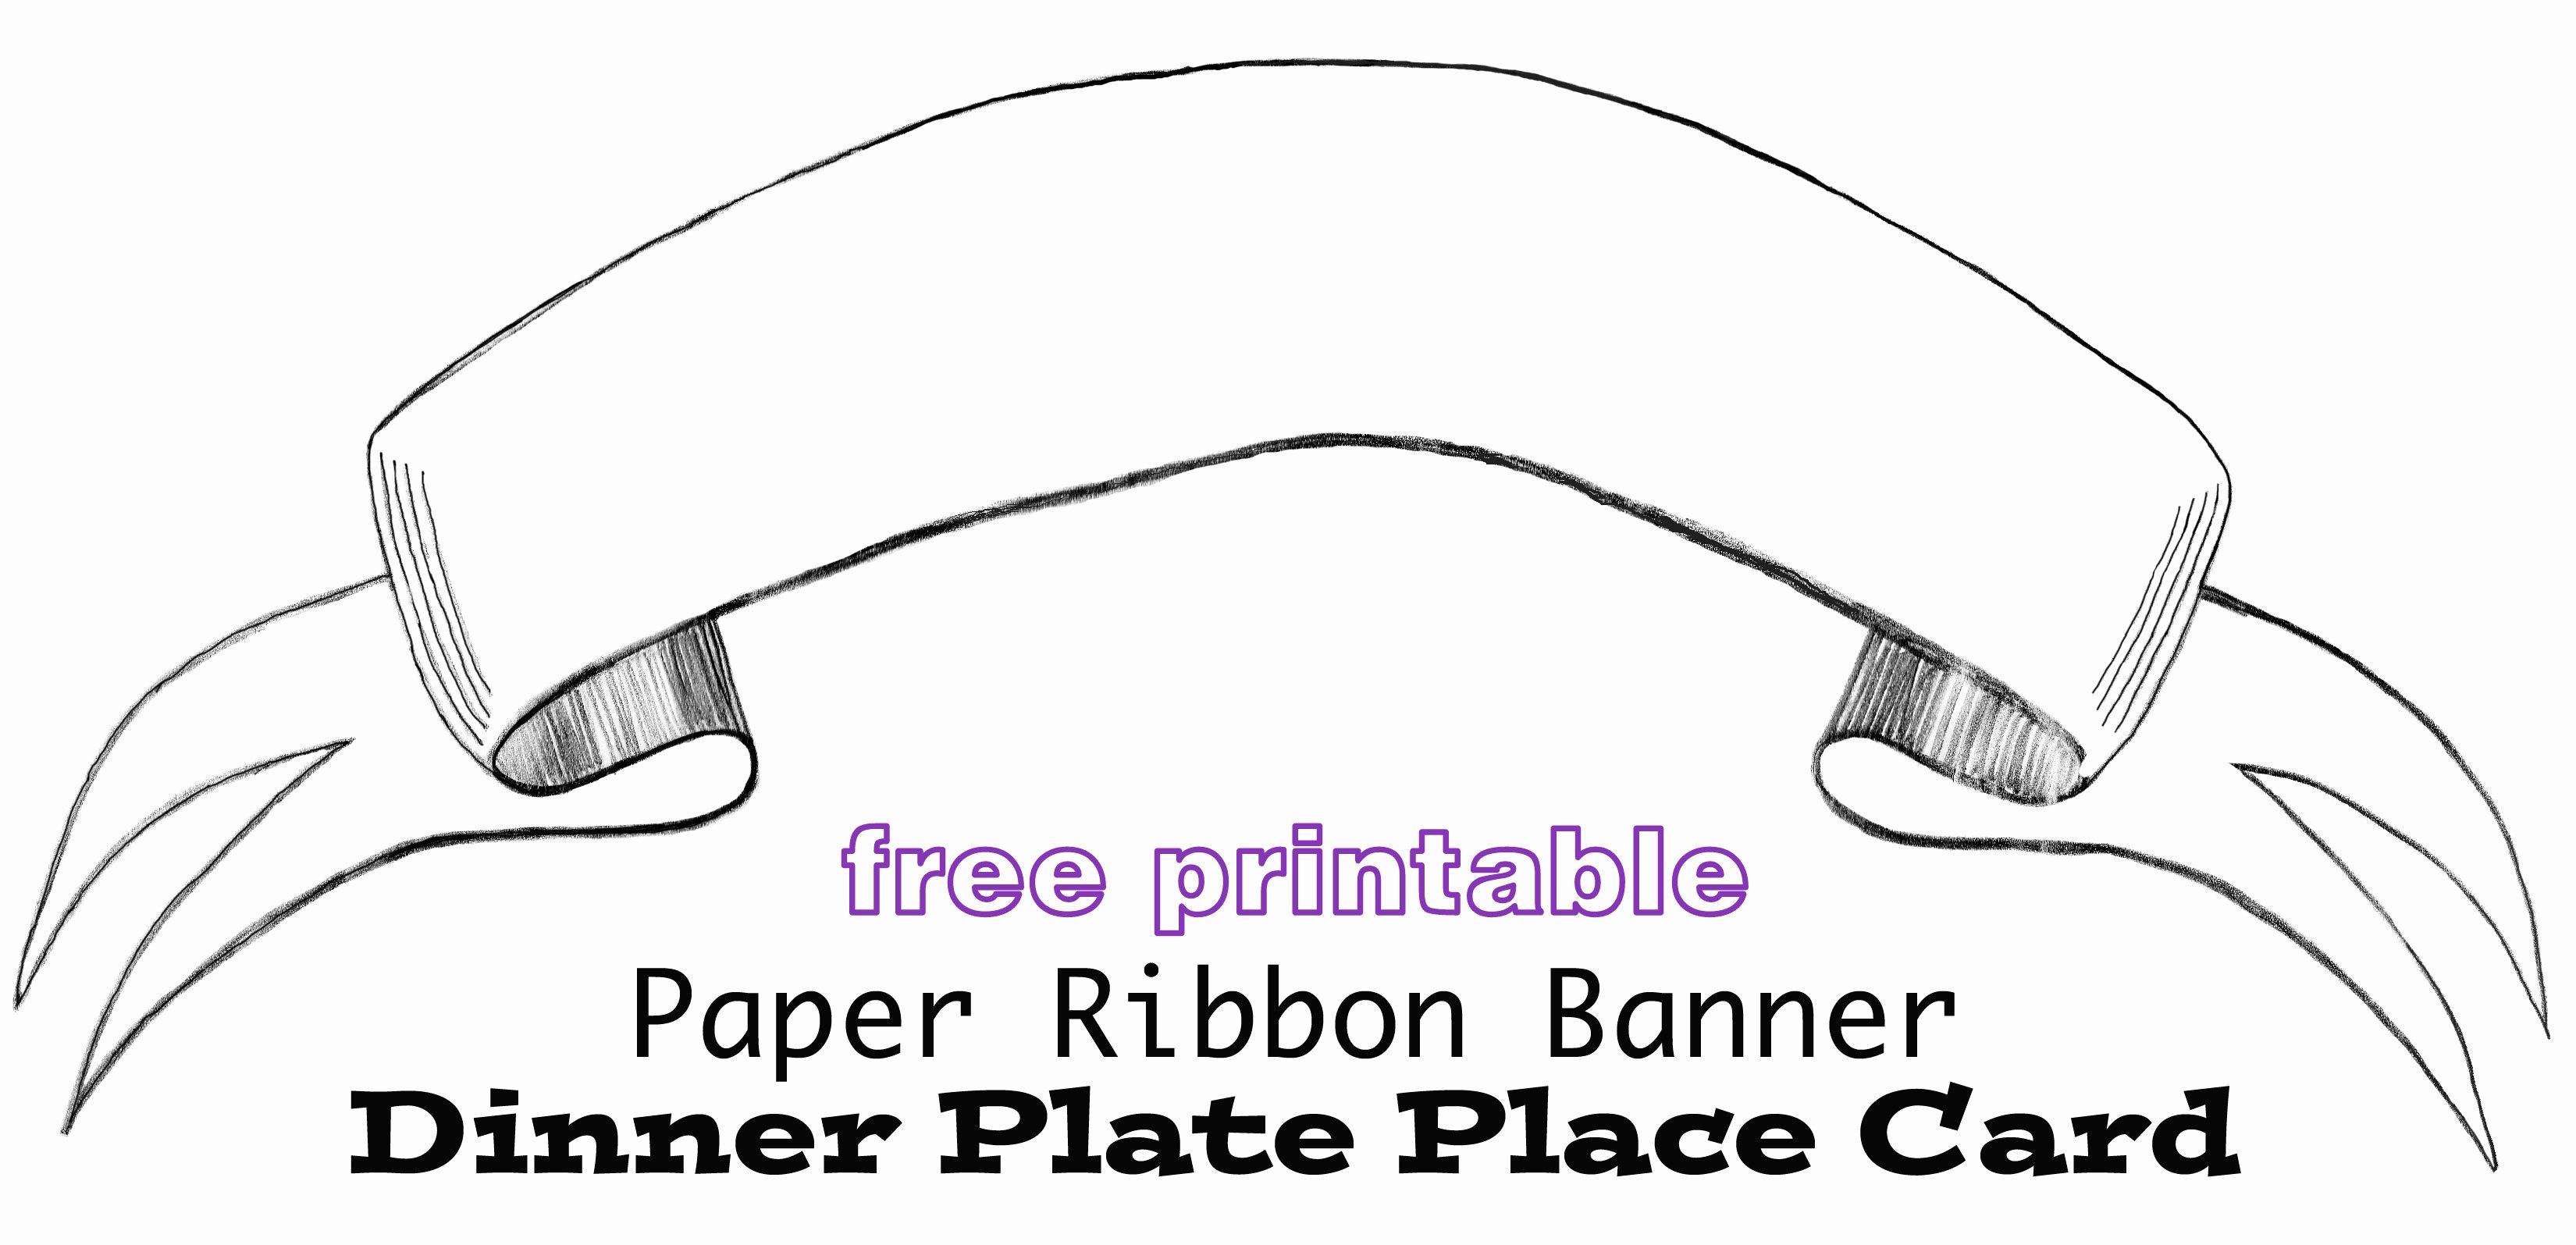 Free Printable Banner Template Awesome Printable Paper Banner Dinner Plate Place Card In My Own